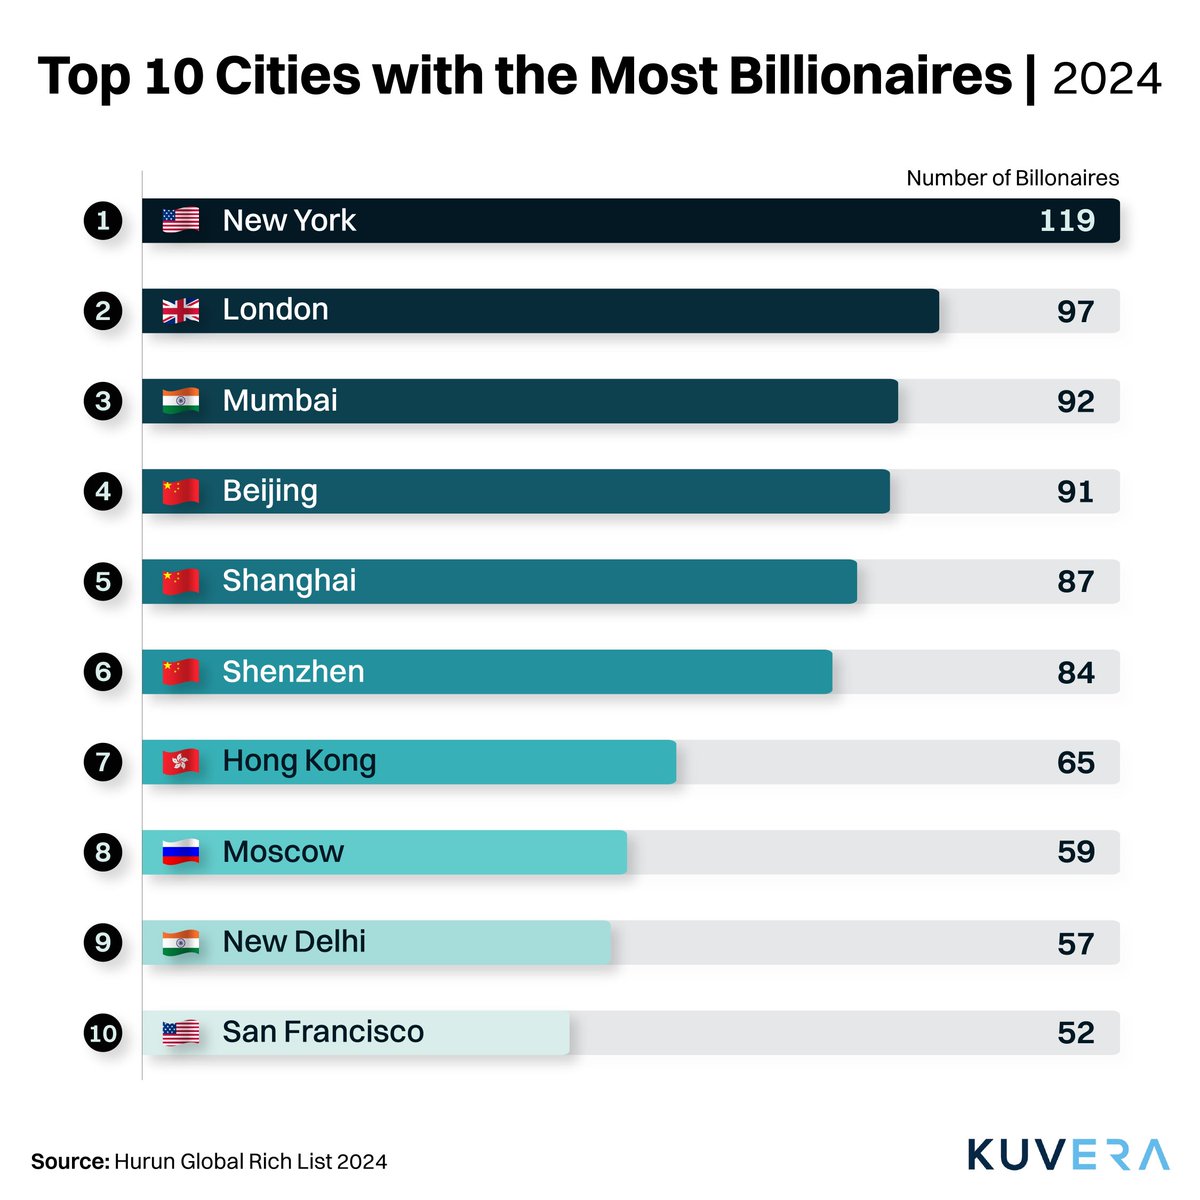 Mumbai overtook Beijing to become Asia’s Billionaire capital for first time & break into world’s top 3. There's new wave of 'Billionaire Raj'.

#chartoftheday #billionaires